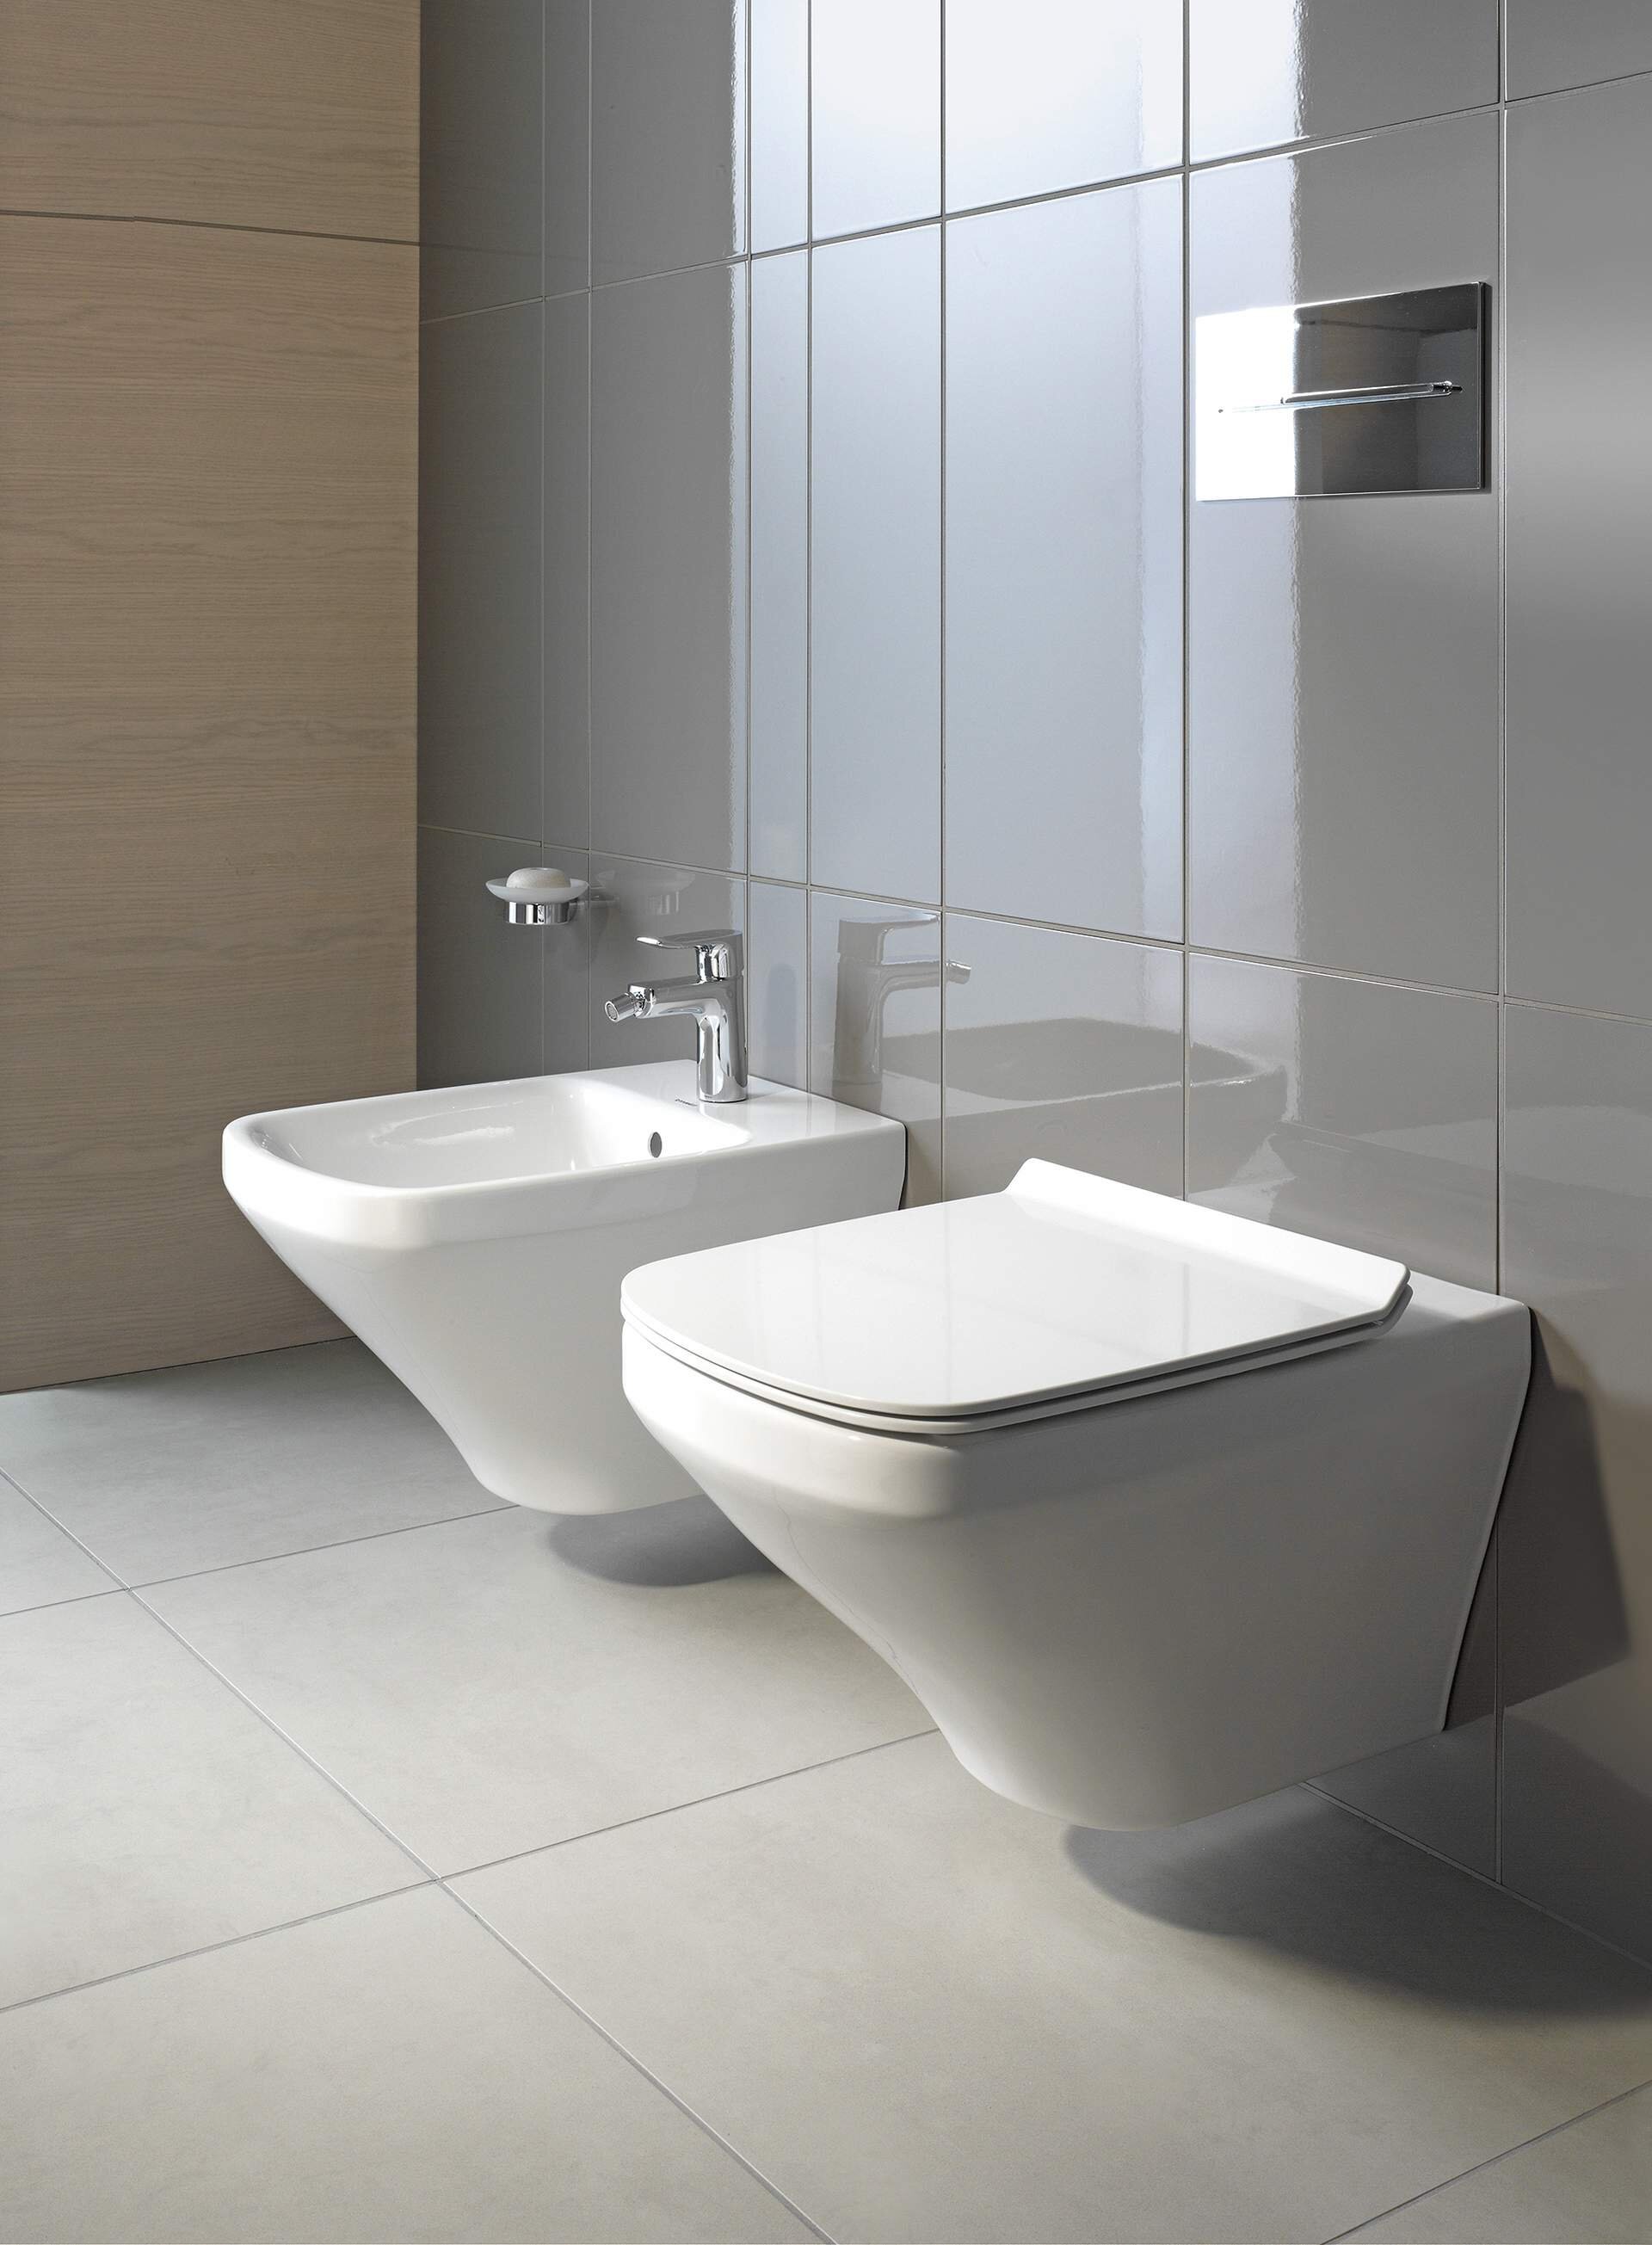 Duravit 1.28 Gallons Per Minute GPF Elongated Mounted Wall Toilets (Seat Not Included) |